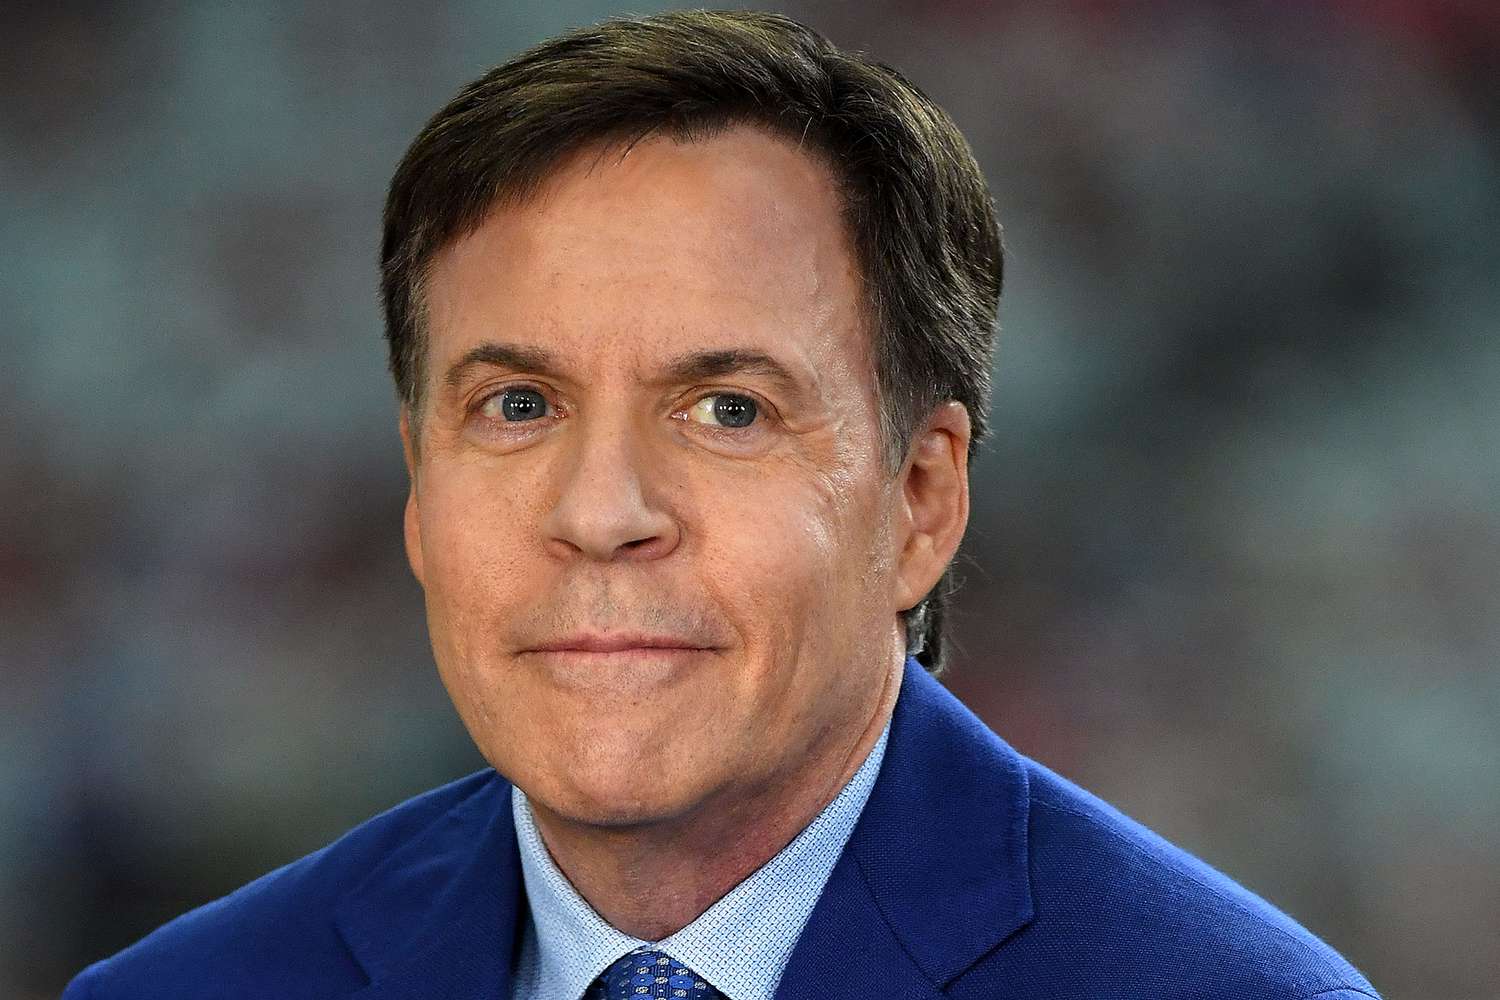 Bob Costas joined the network in 1979.